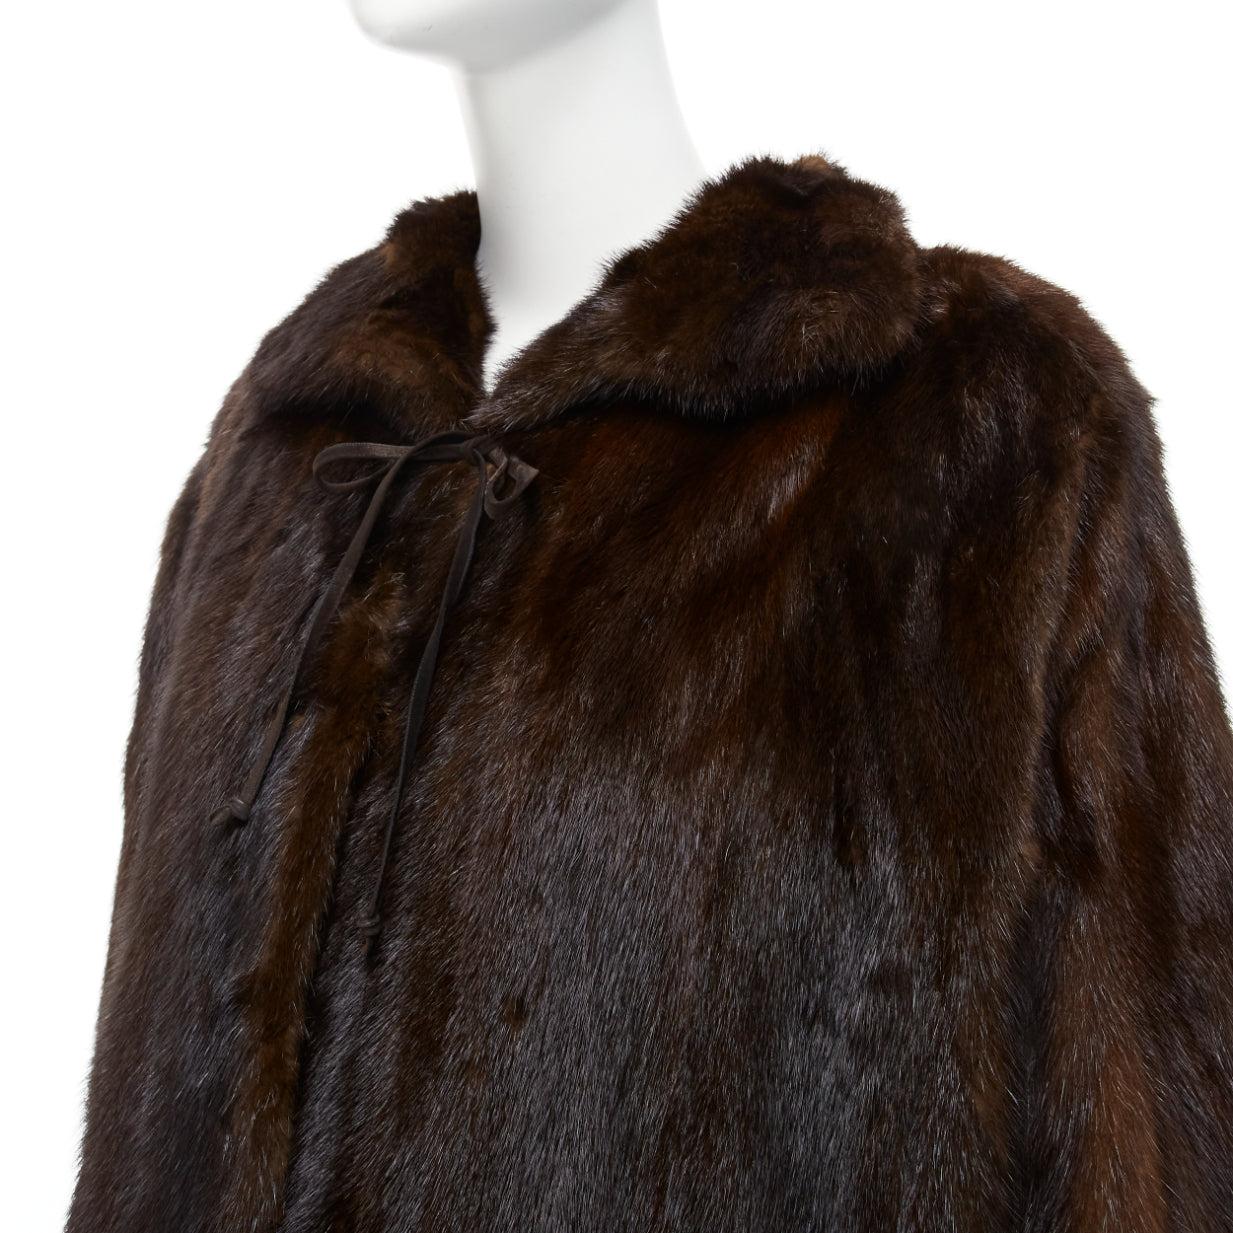 UNLABELLED dark brown genuine fur tie collar longline long sleeve jacket coat
Reference: JACG/A00156
Brand: No Brand
Material: Fur
Color: Brown
Pattern: Animal Print
Closure: Tie Neck
Lining: Brown Fabric

CONDITION:
Condition: Very good, this item